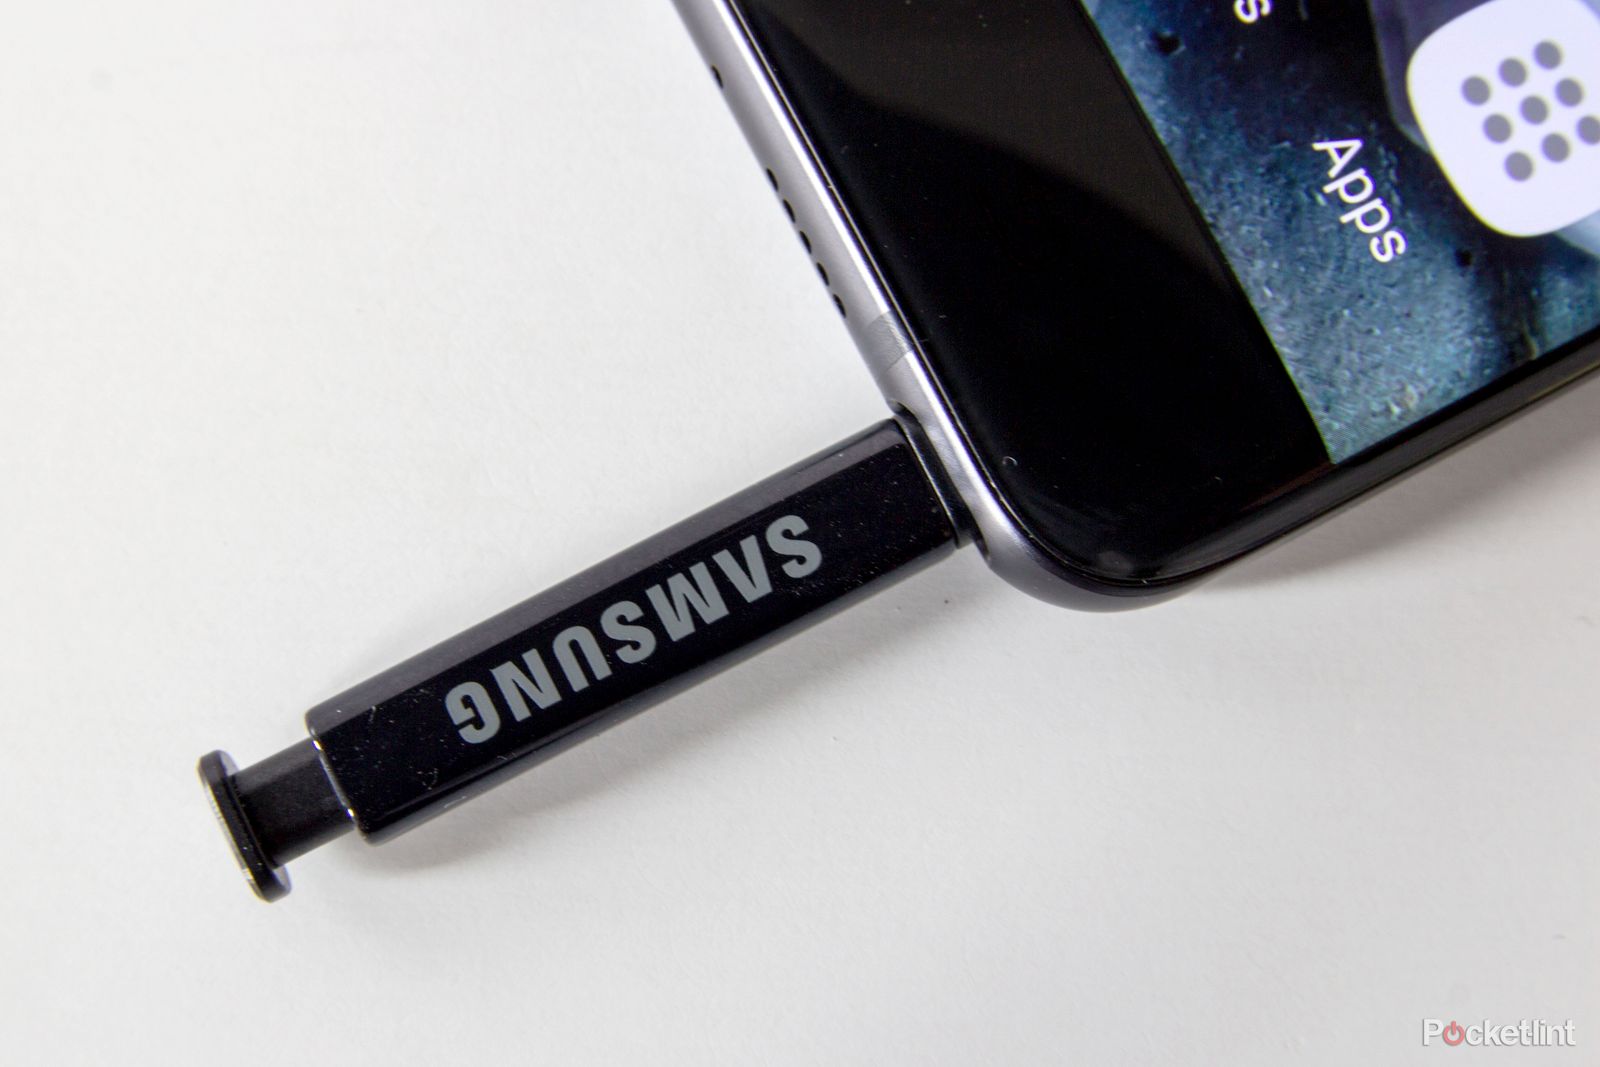 samsung galaxy note 8 said to have 6 3 inch 18 5 9 screen image 1